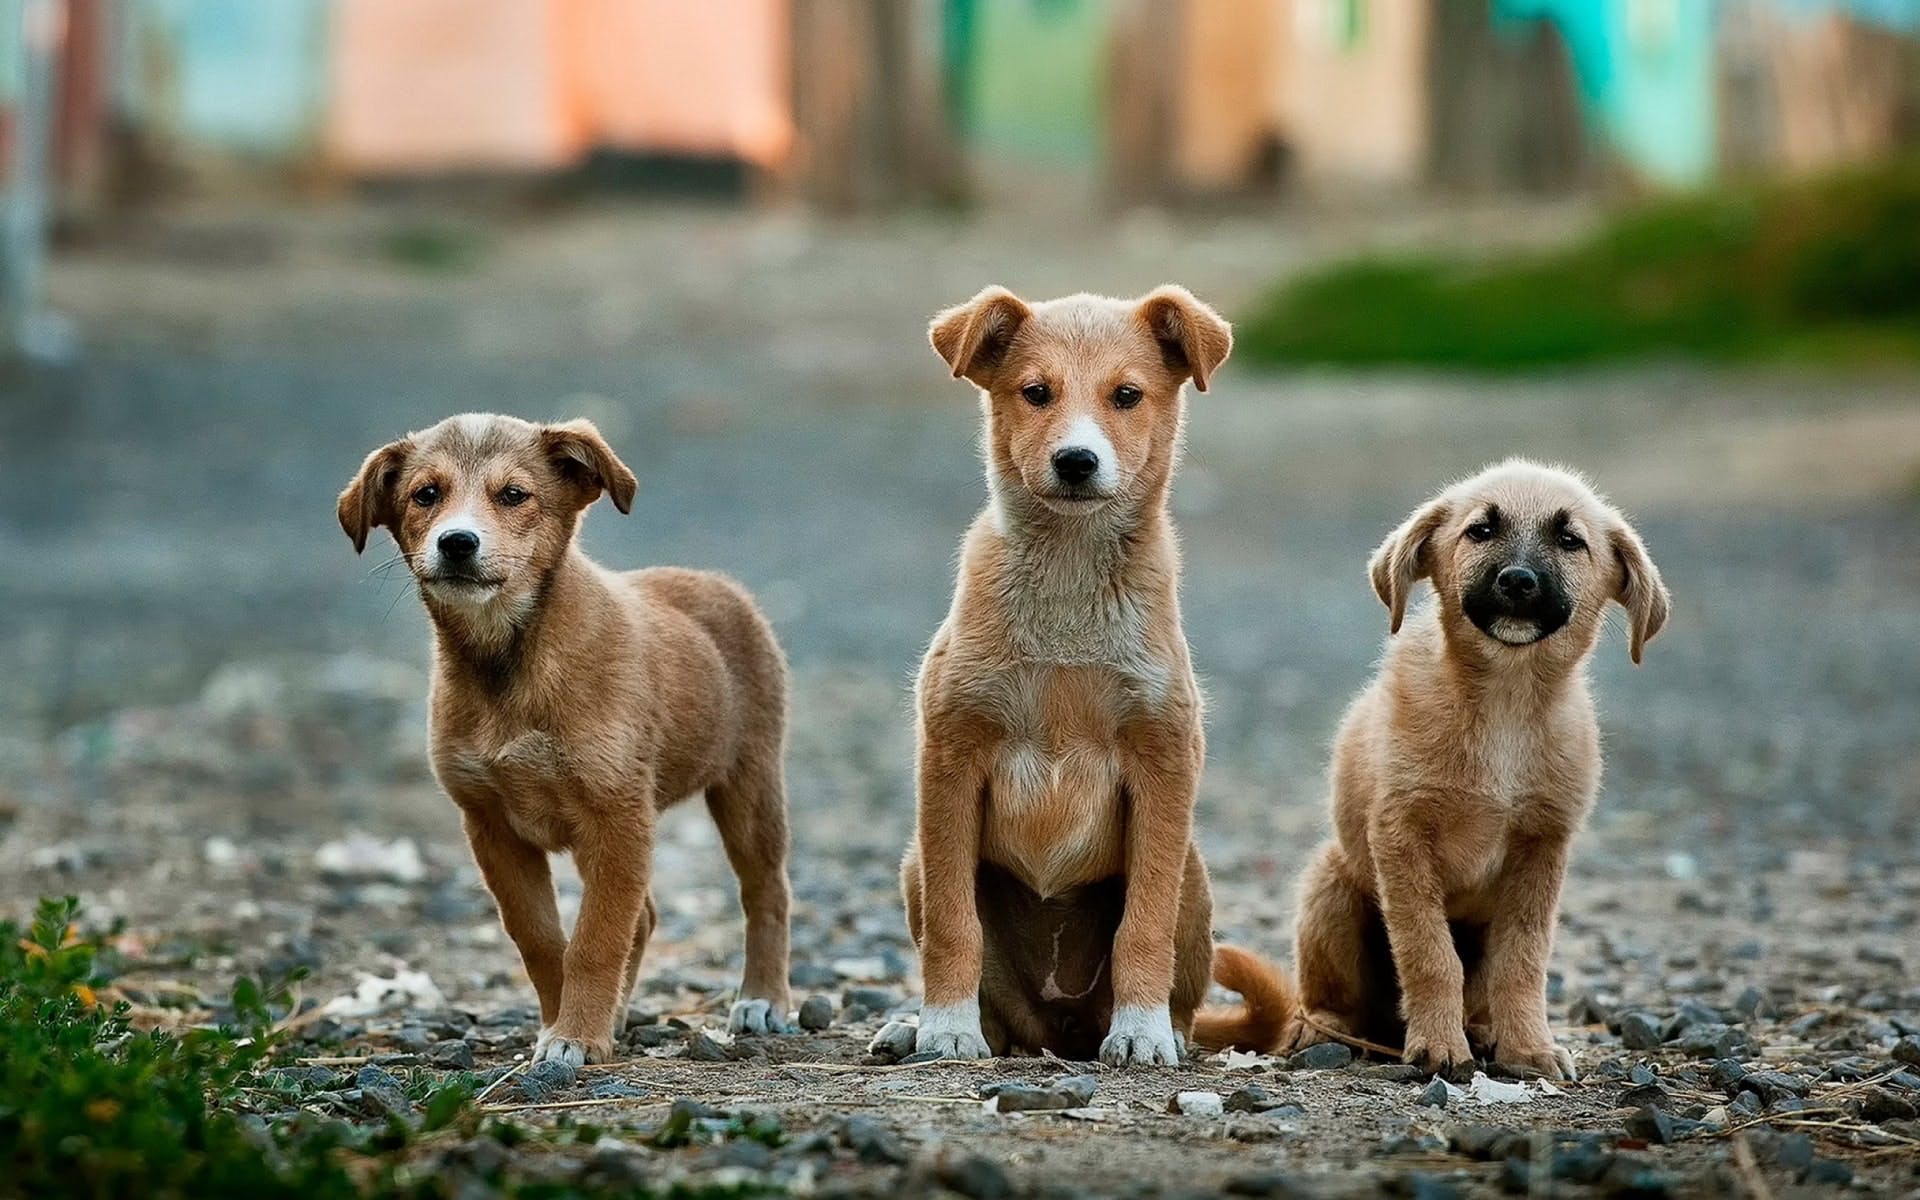 According to official data, India is the home to some 1.6 crore stray dogs in 2021.